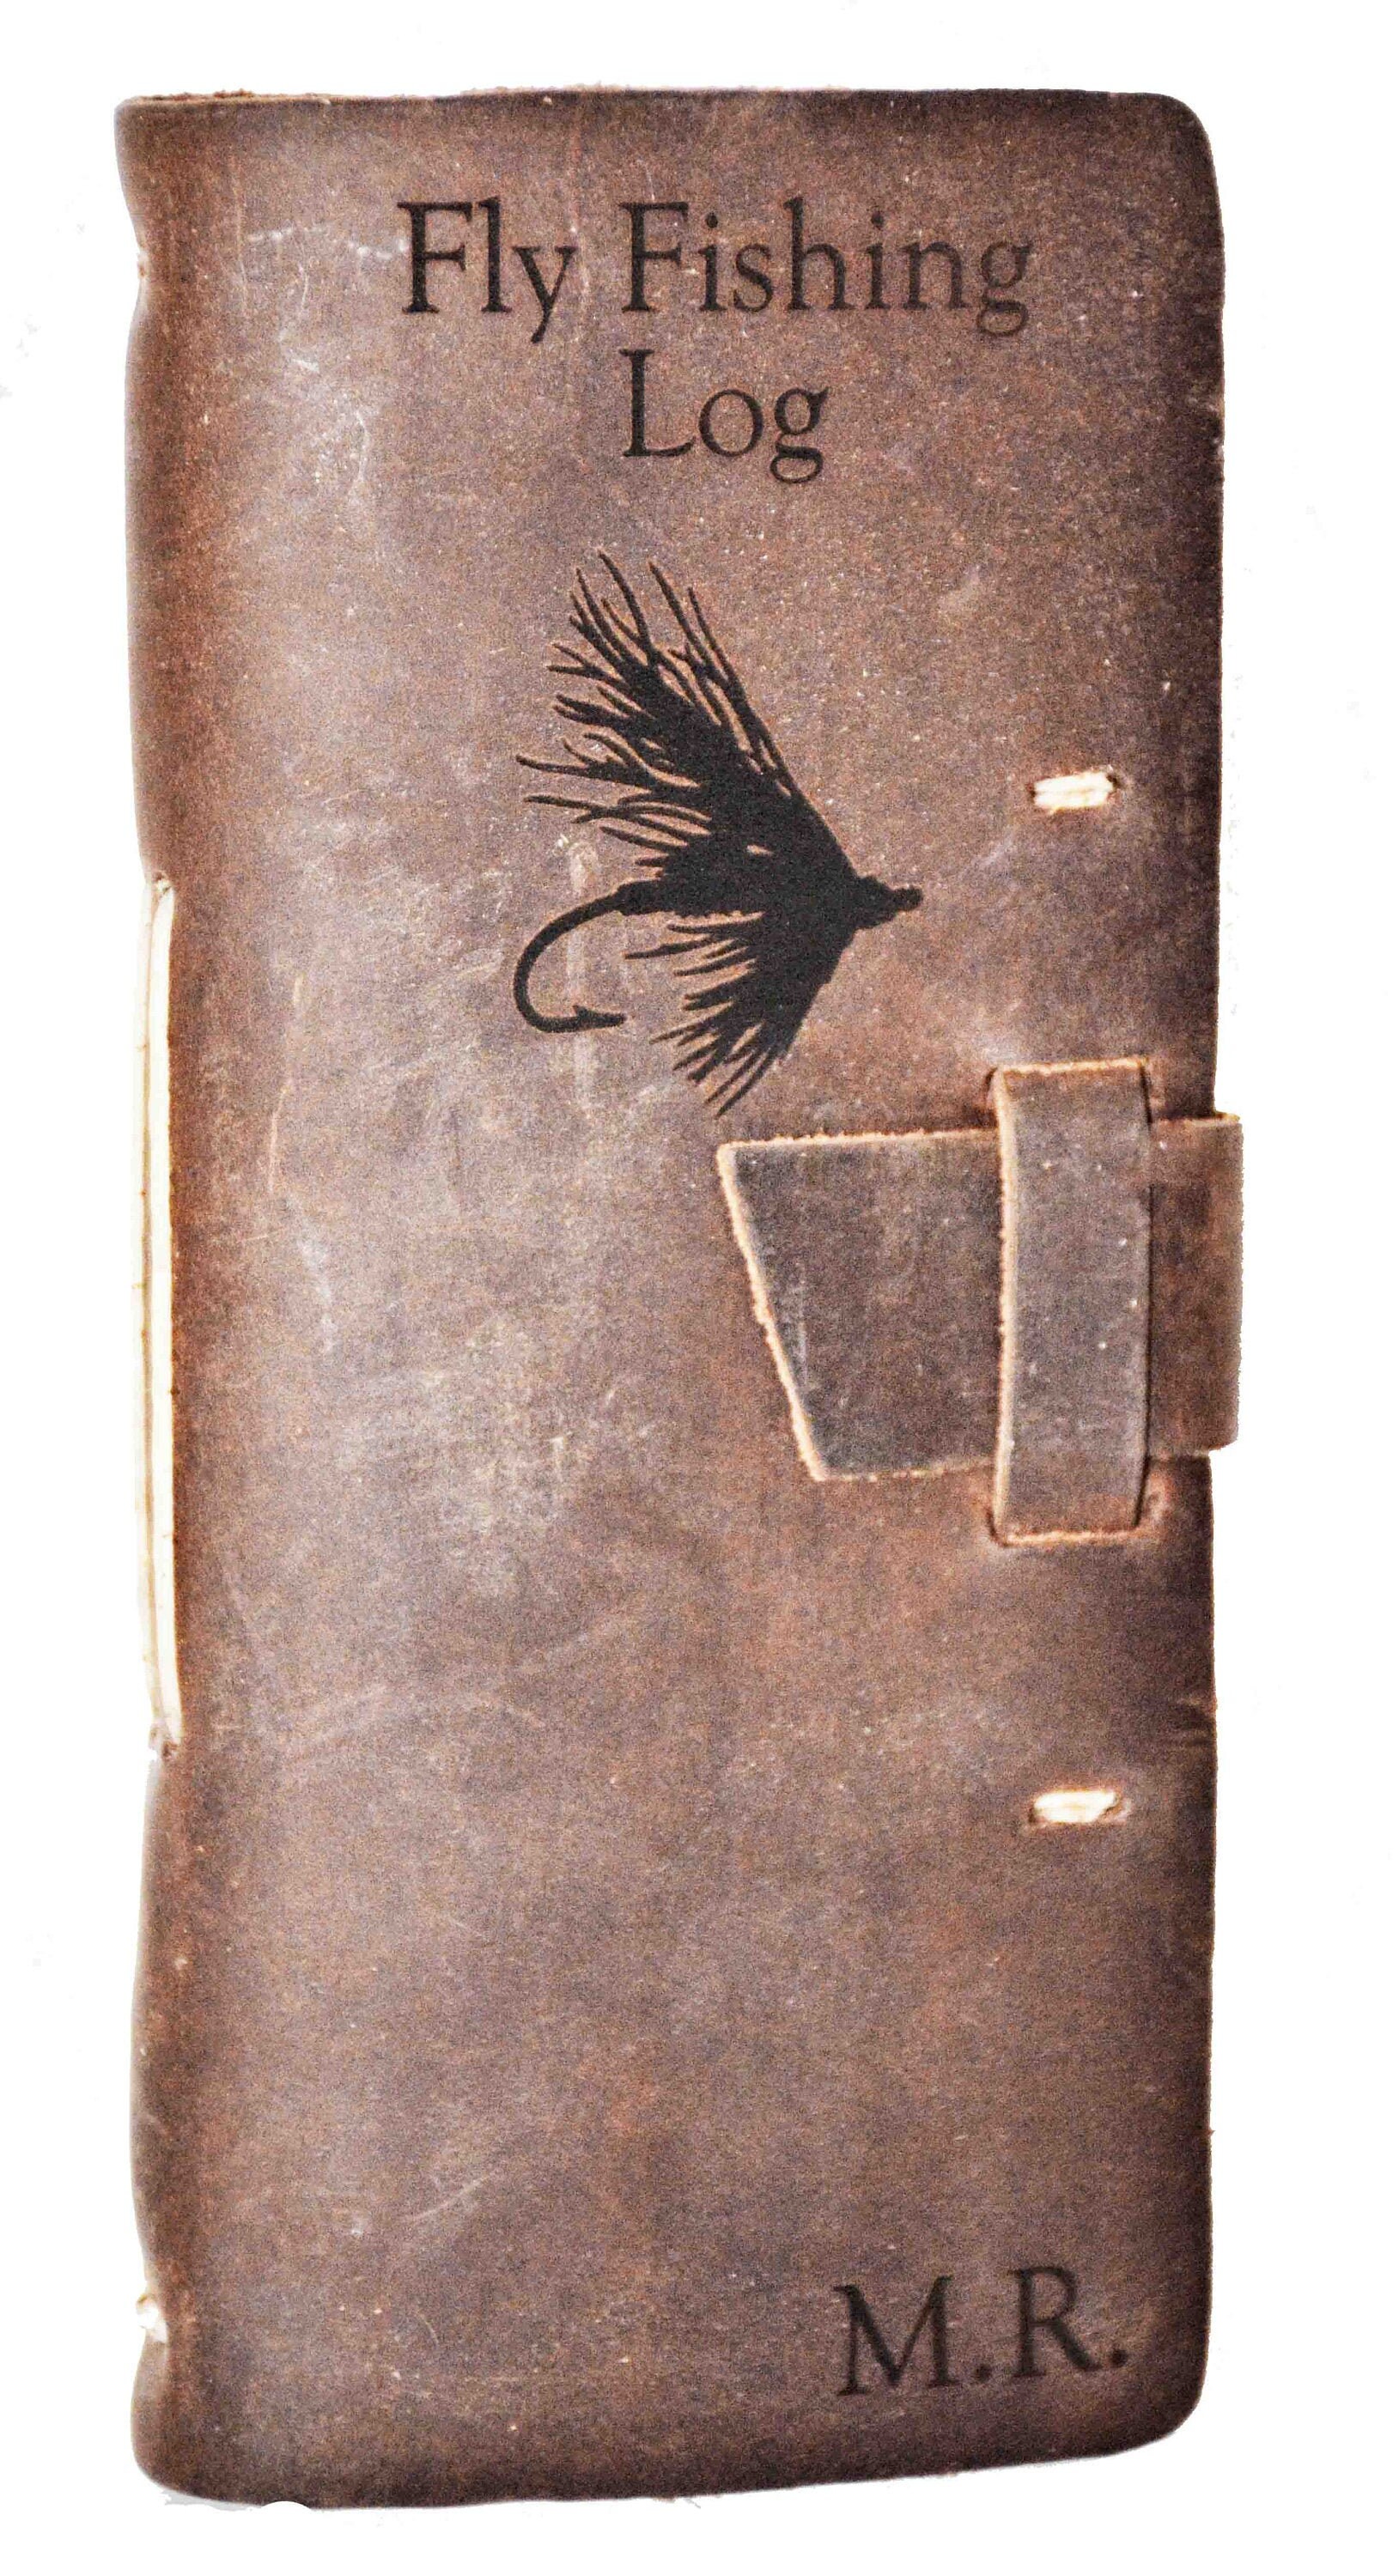 Leather Fishing Journal 